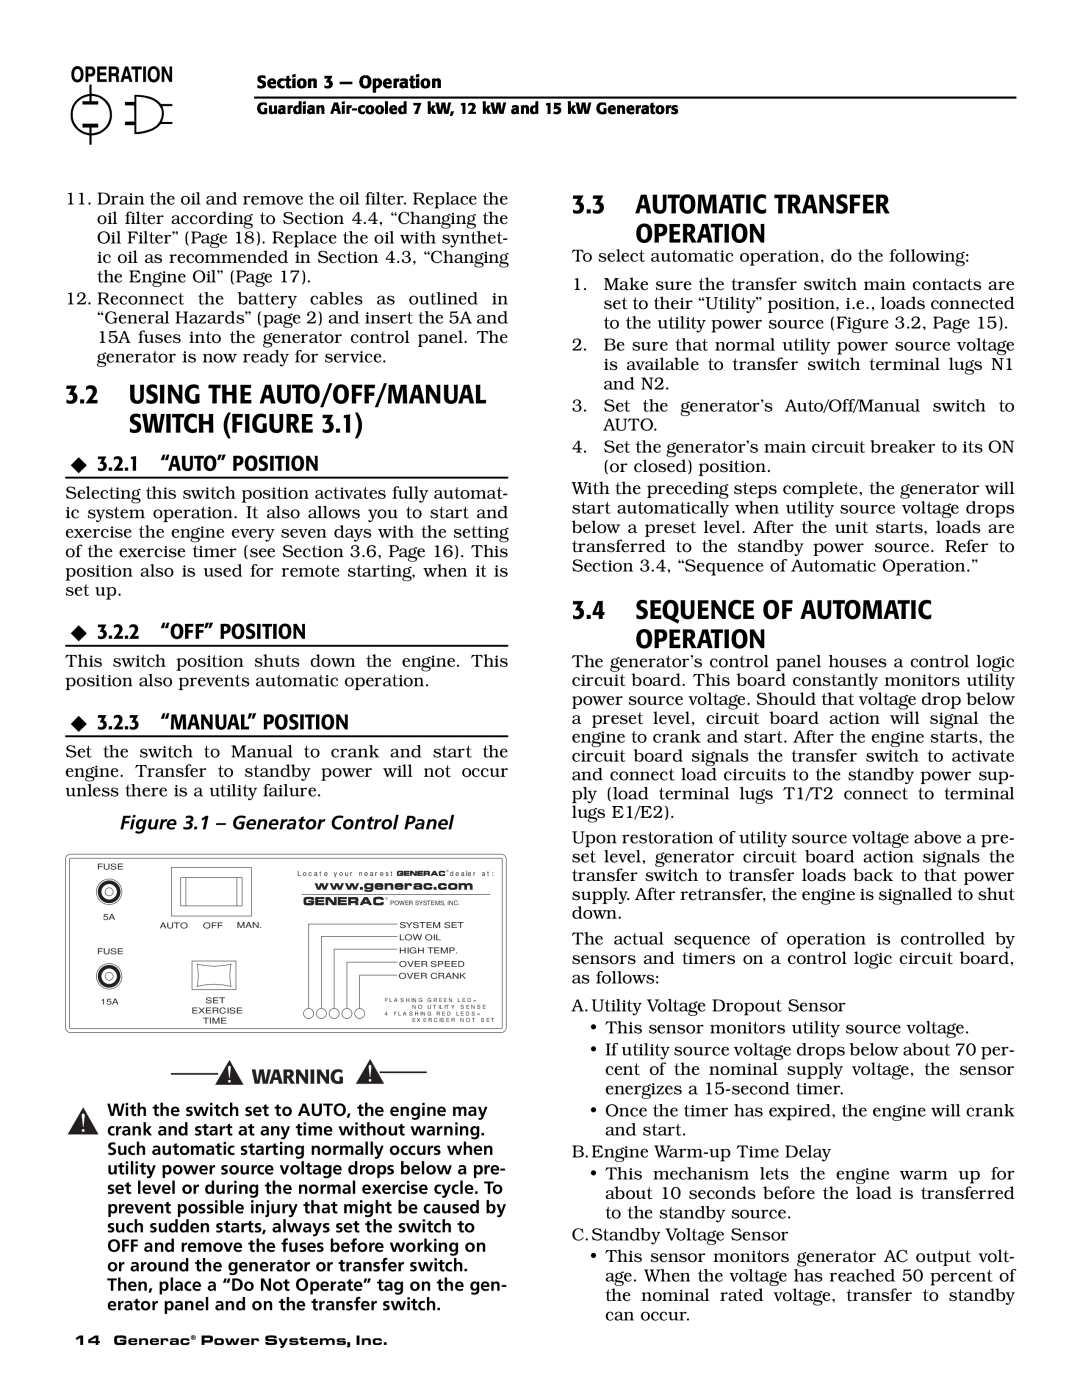 Generac 04389-1, 04456-1, 04390-1 owner manual 3.3AUTOMATIC TRANSFER OPERATION, 3.2USING THE AUTO/OFF/MANUAL SWITCH FIGURE 